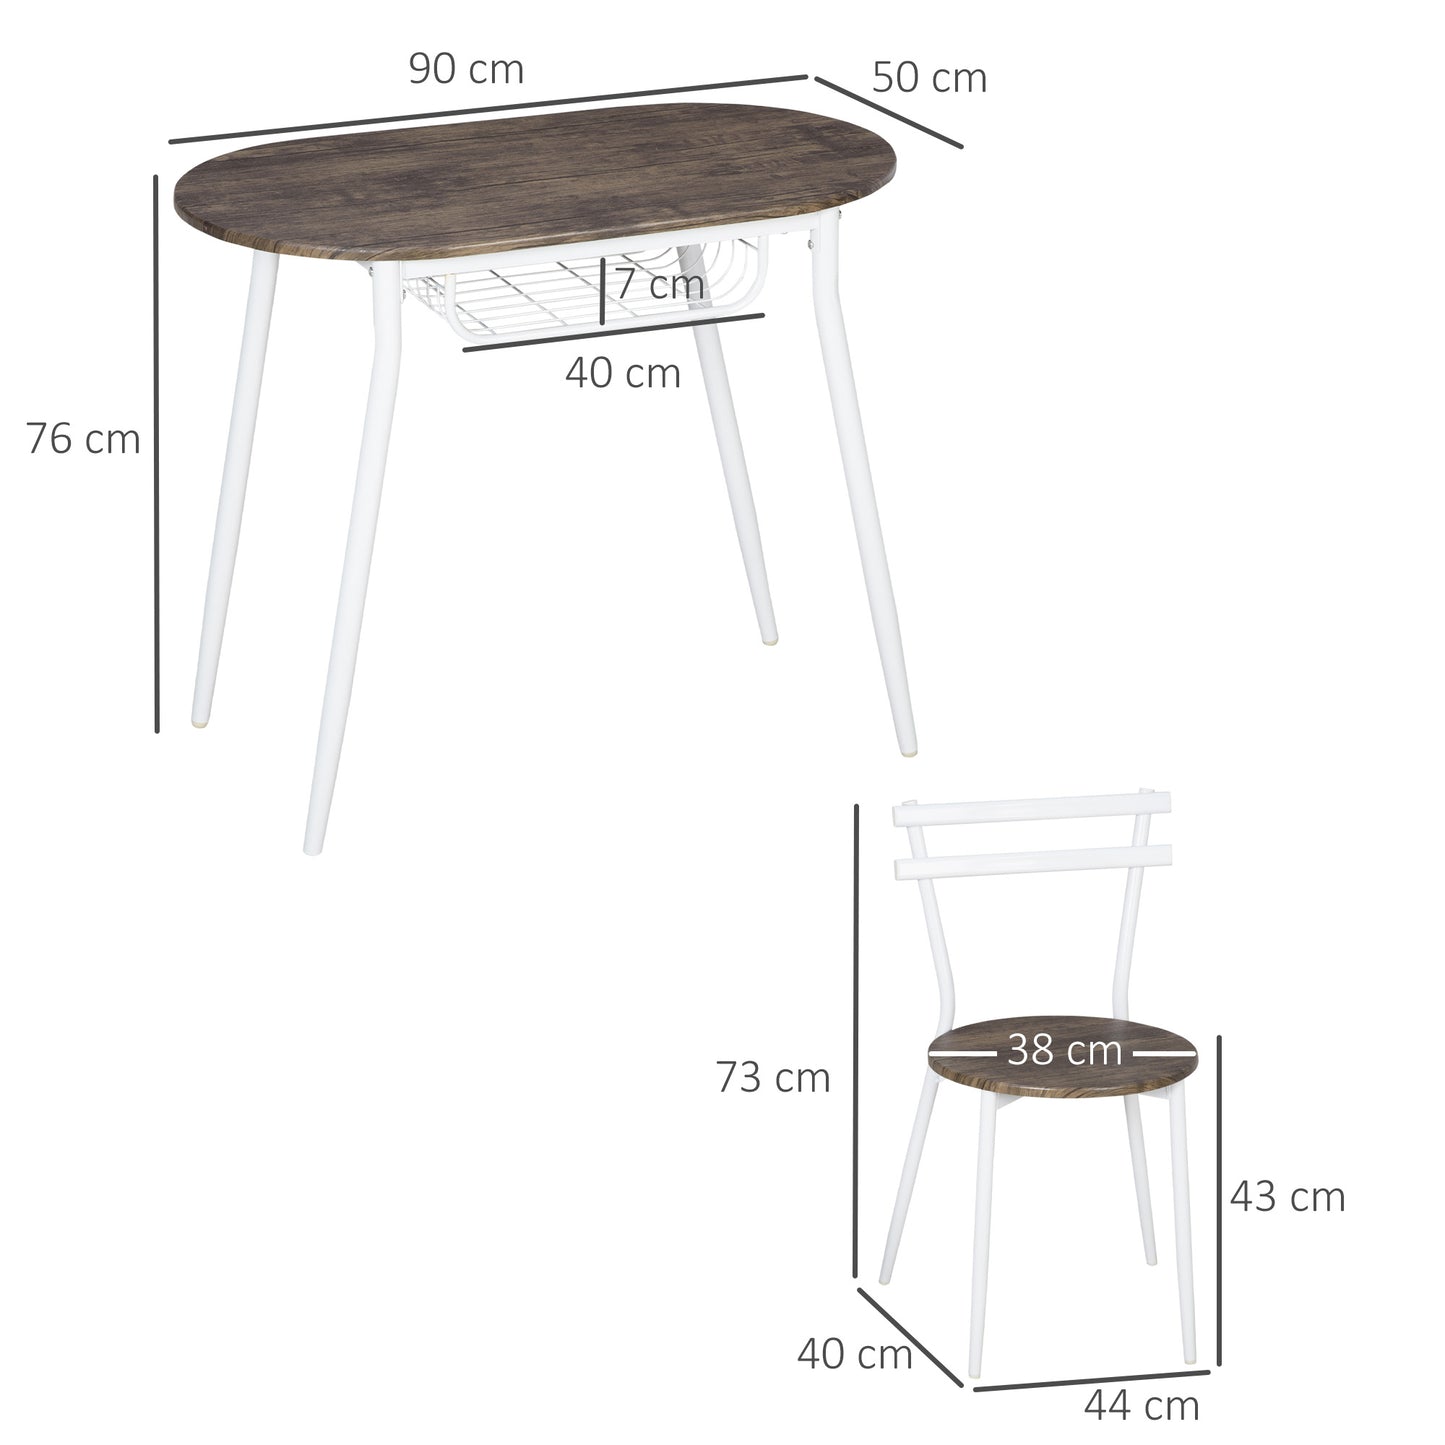 HOMCOM 3-Piece Dining Table and Chairs Set, Oval Kitchen Table with 2 Chairs, with Wire Storage Shelf and Steel Frame, Natural